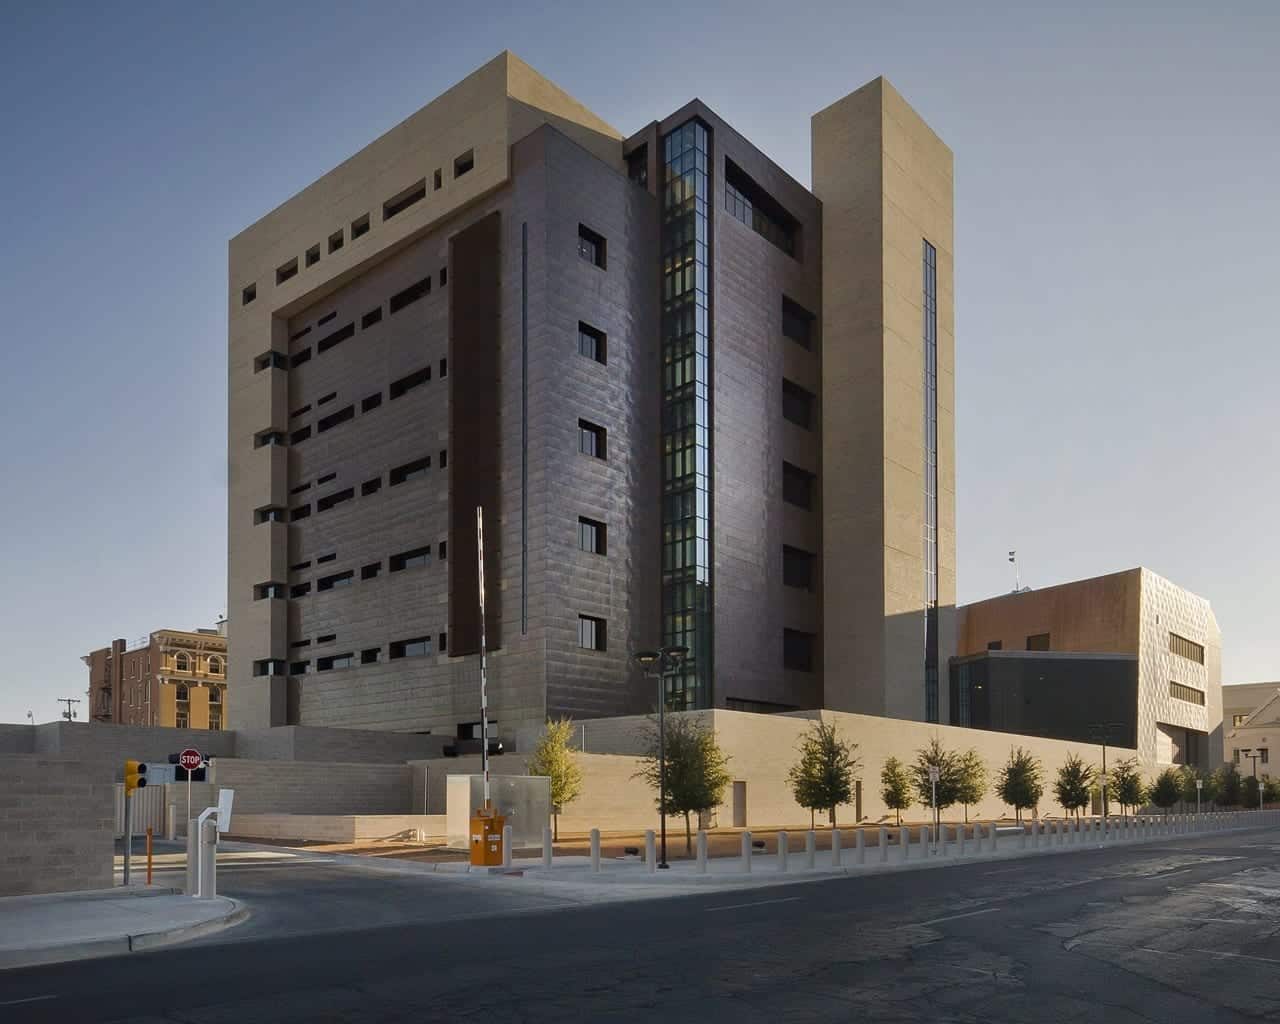 North elevation of the El Paso Federal Courthouse.